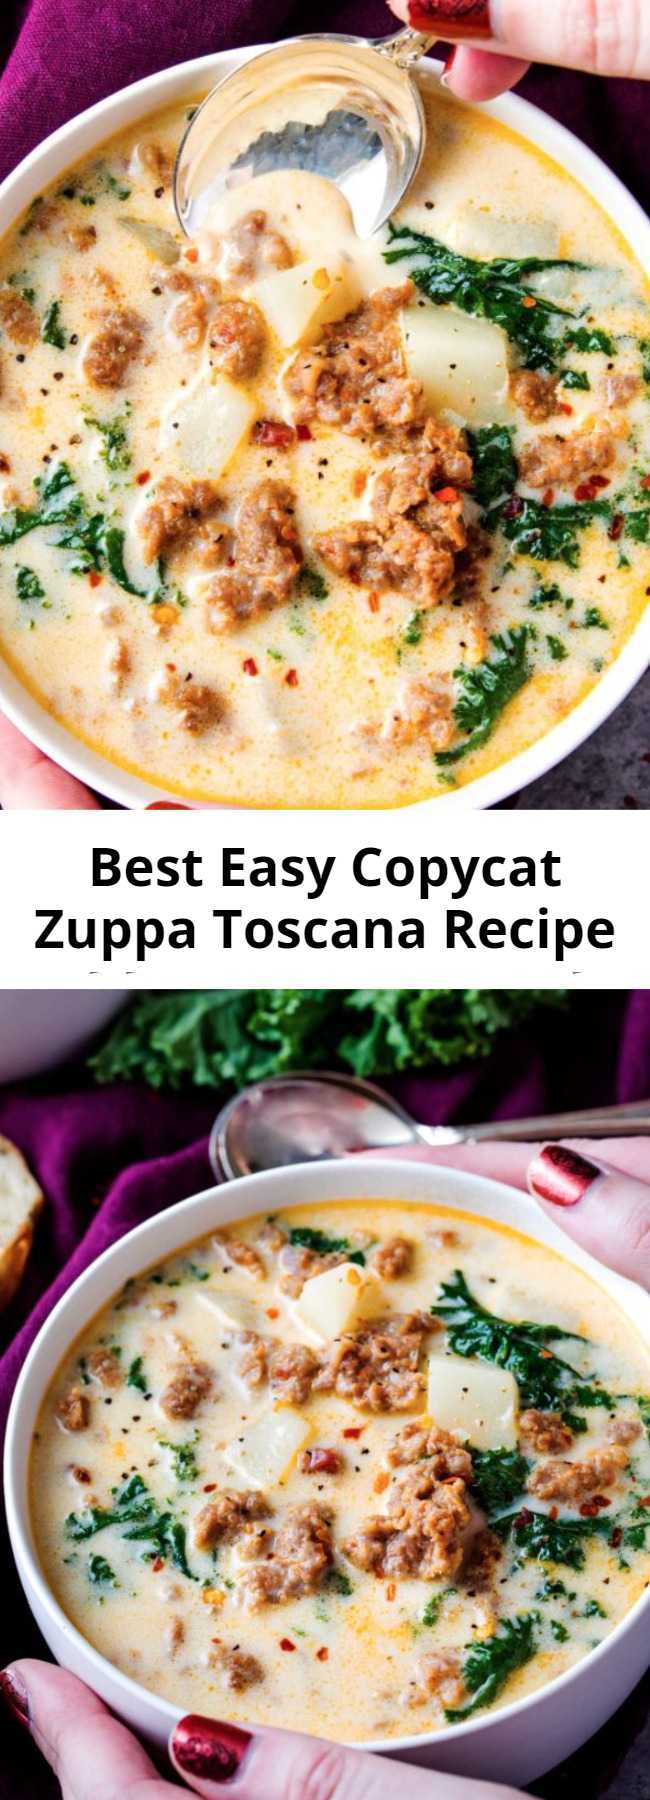 Best Easy Copycat Zuppa Toscana Recipe - Classic zuppa toscana soup, in slow cooker form!  It tastes WAY better than the restaurant version, and is sure to be a crowd pleaser!